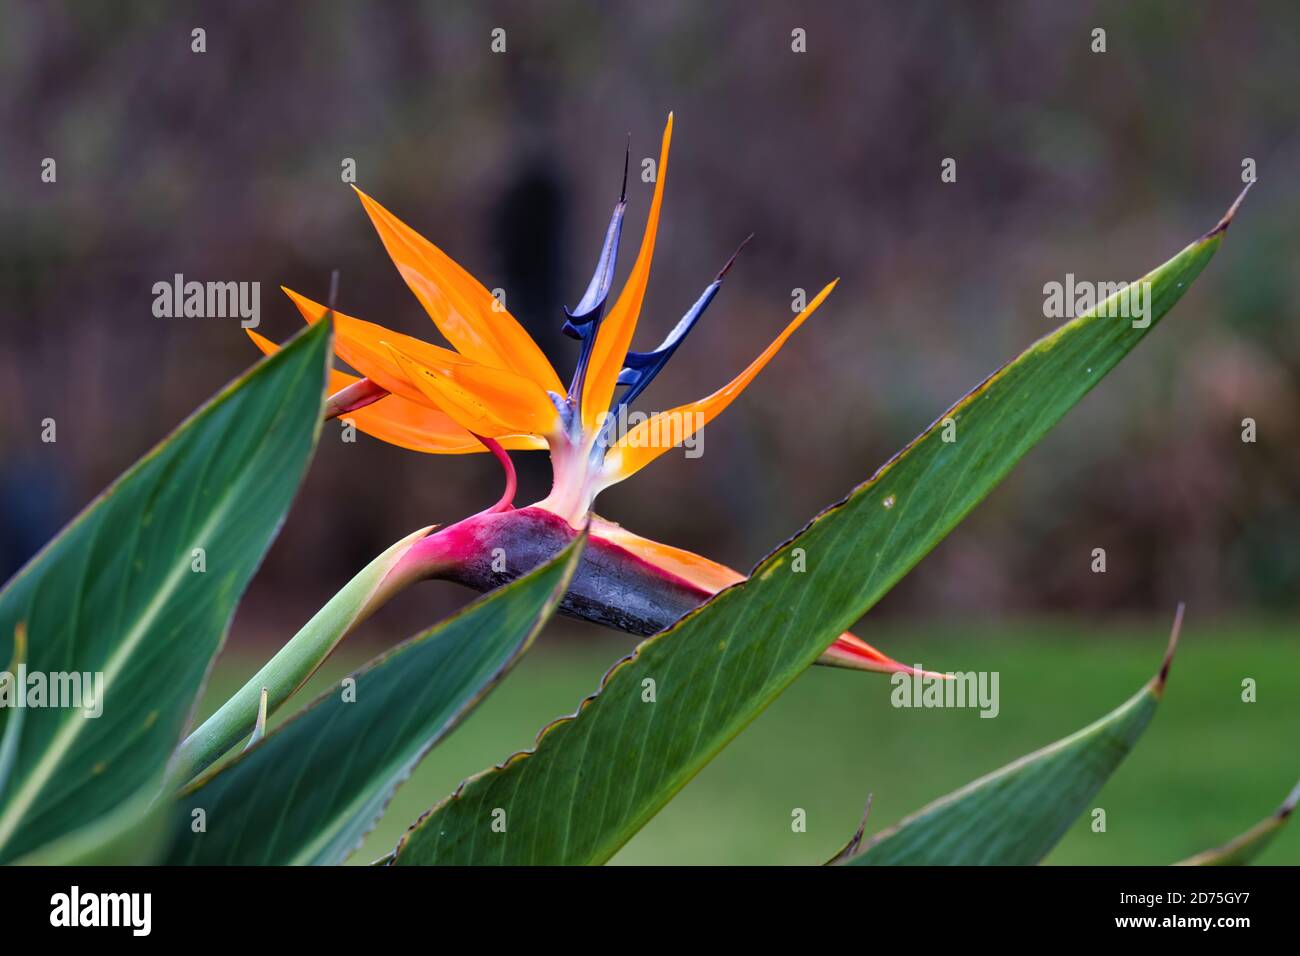 Beautiful close-up of a bright and colorful bird of paradise flower. Stock Photo